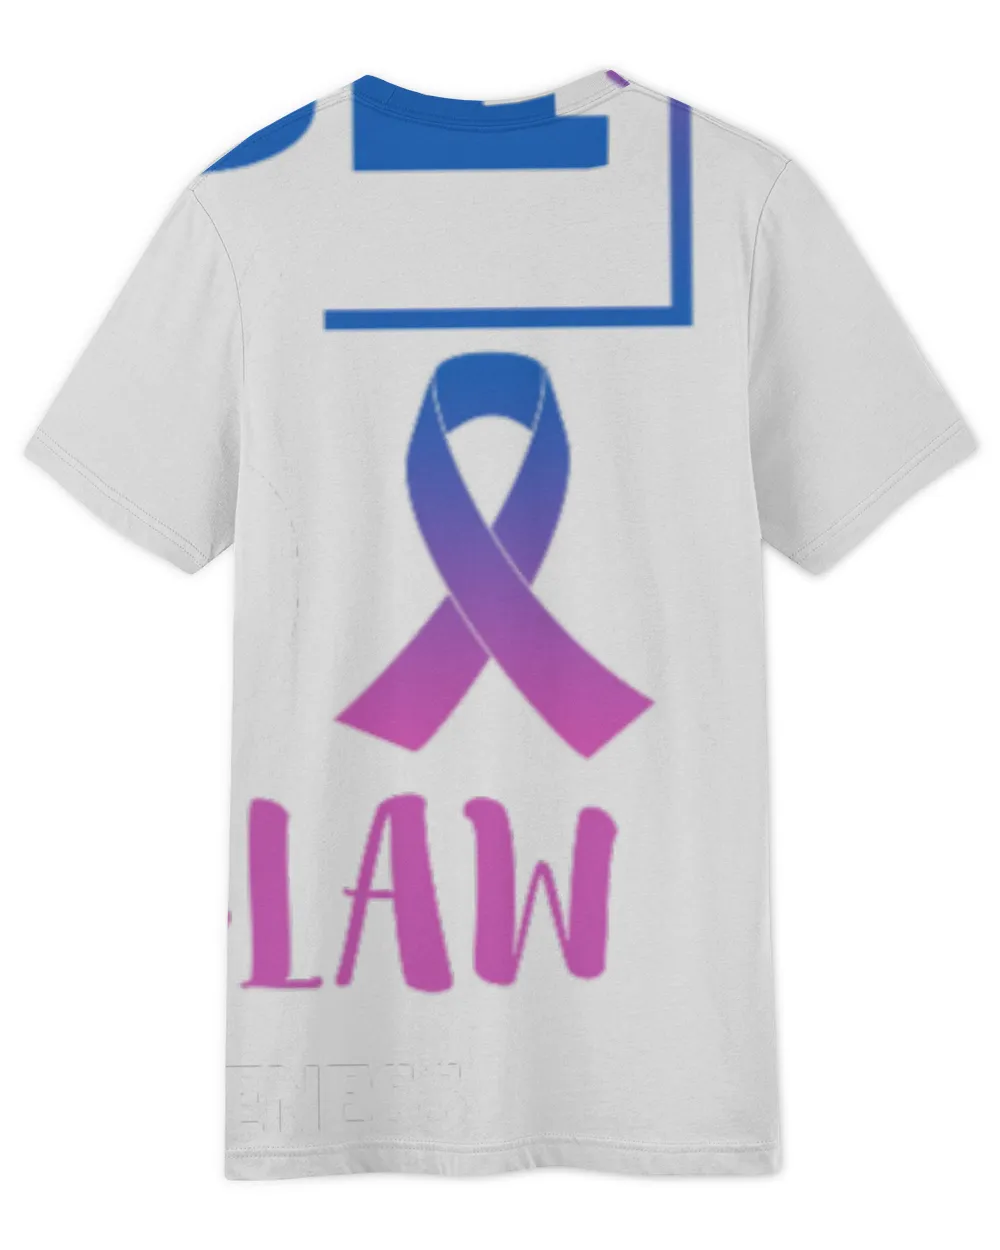 I Wear Pink Blue For My Kind Father-In-Law Thyroid Cancer Awareness